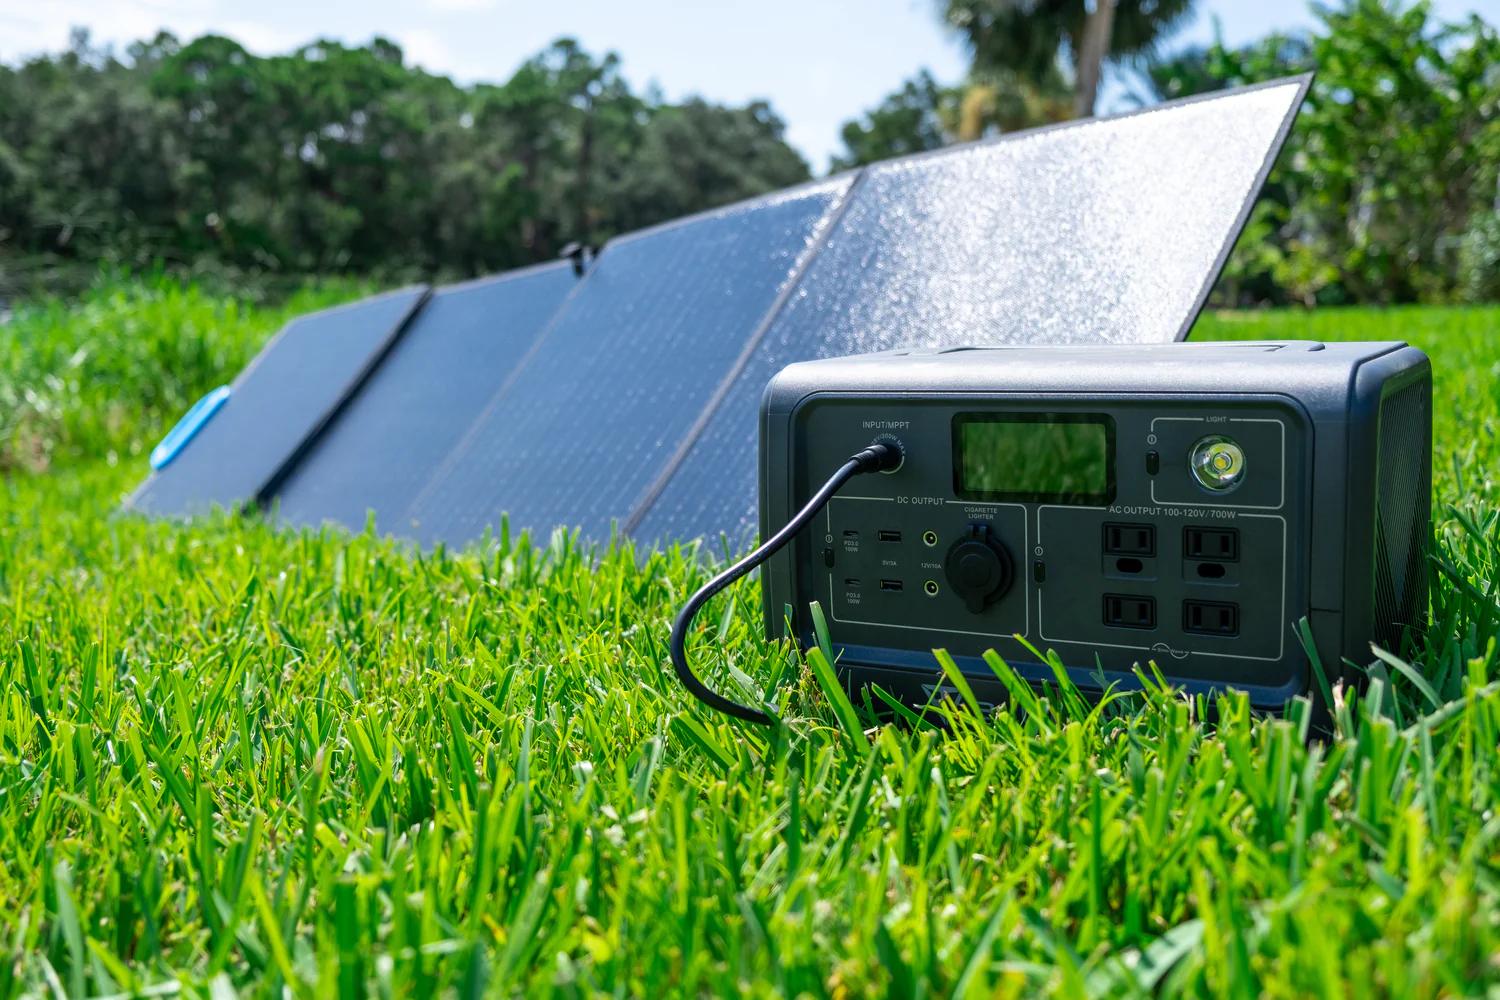 portable solar panels - Can you power a house with portable solar panels